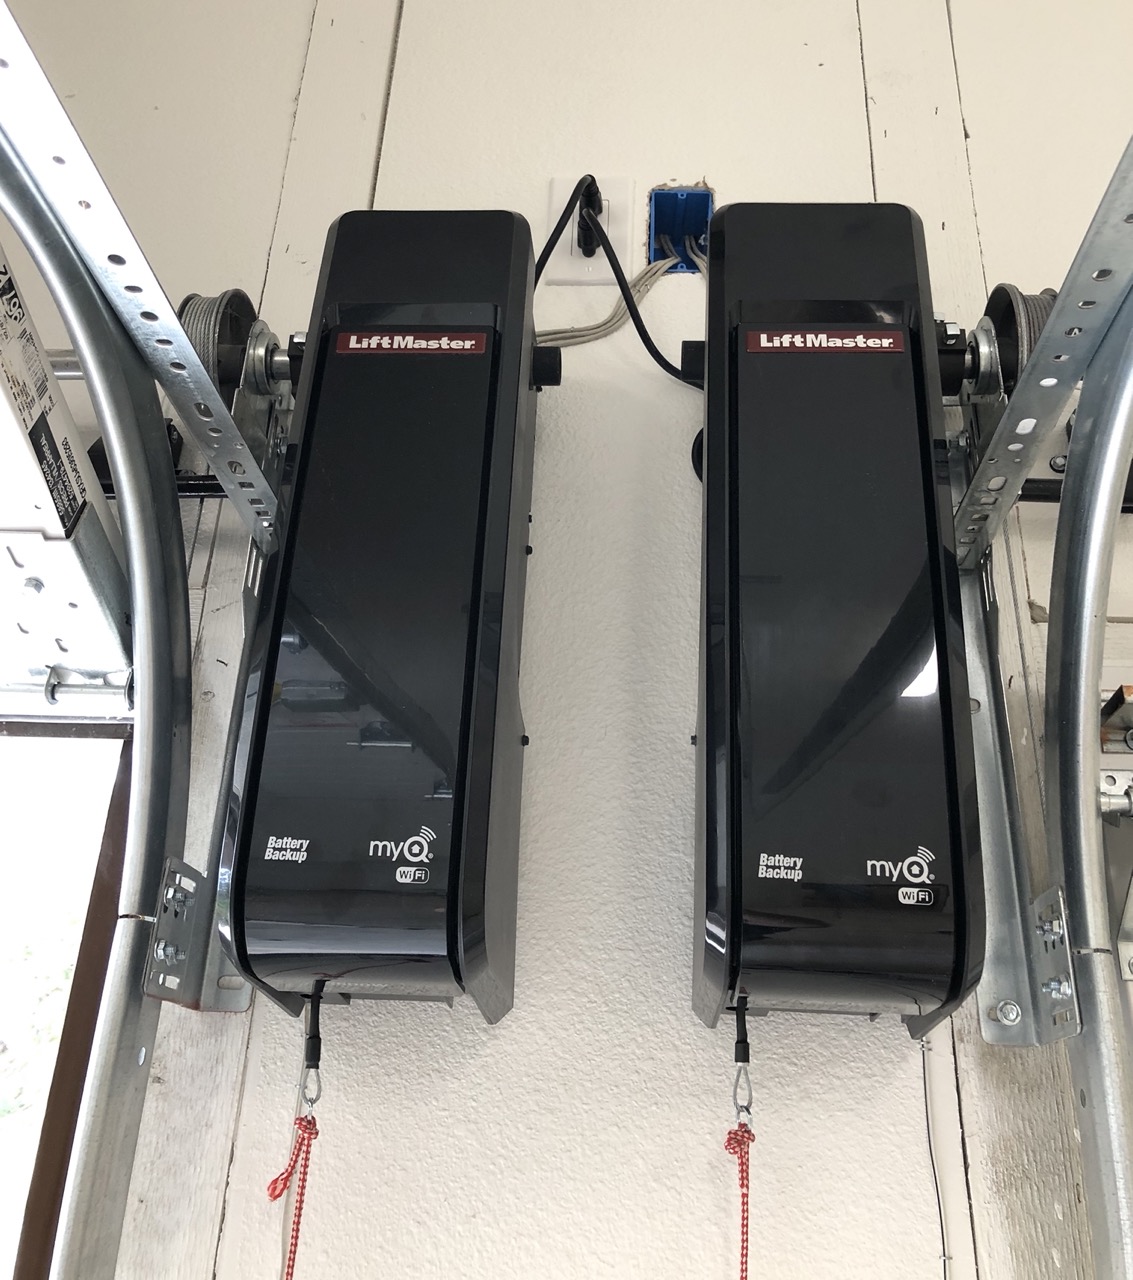 Two LiftMaster 8500W wall mount garage door openers we installed in the same garage. One is mounted on the right side of the garage door and the other is mounted on the left side.